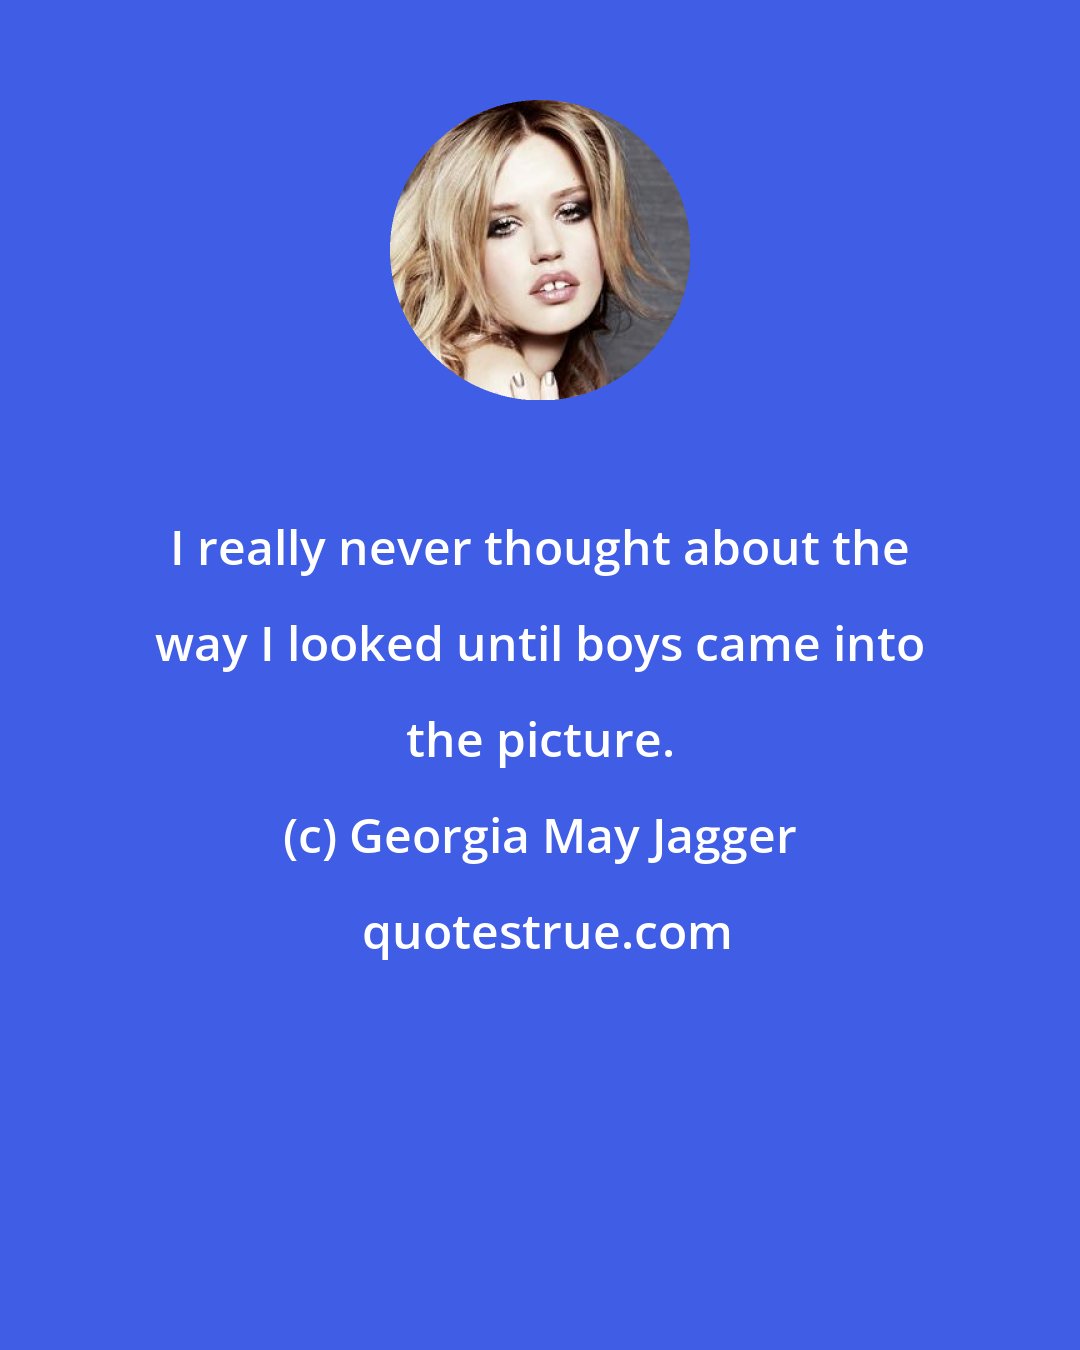 Georgia May Jagger: I really never thought about the way I looked until boys came into the picture.